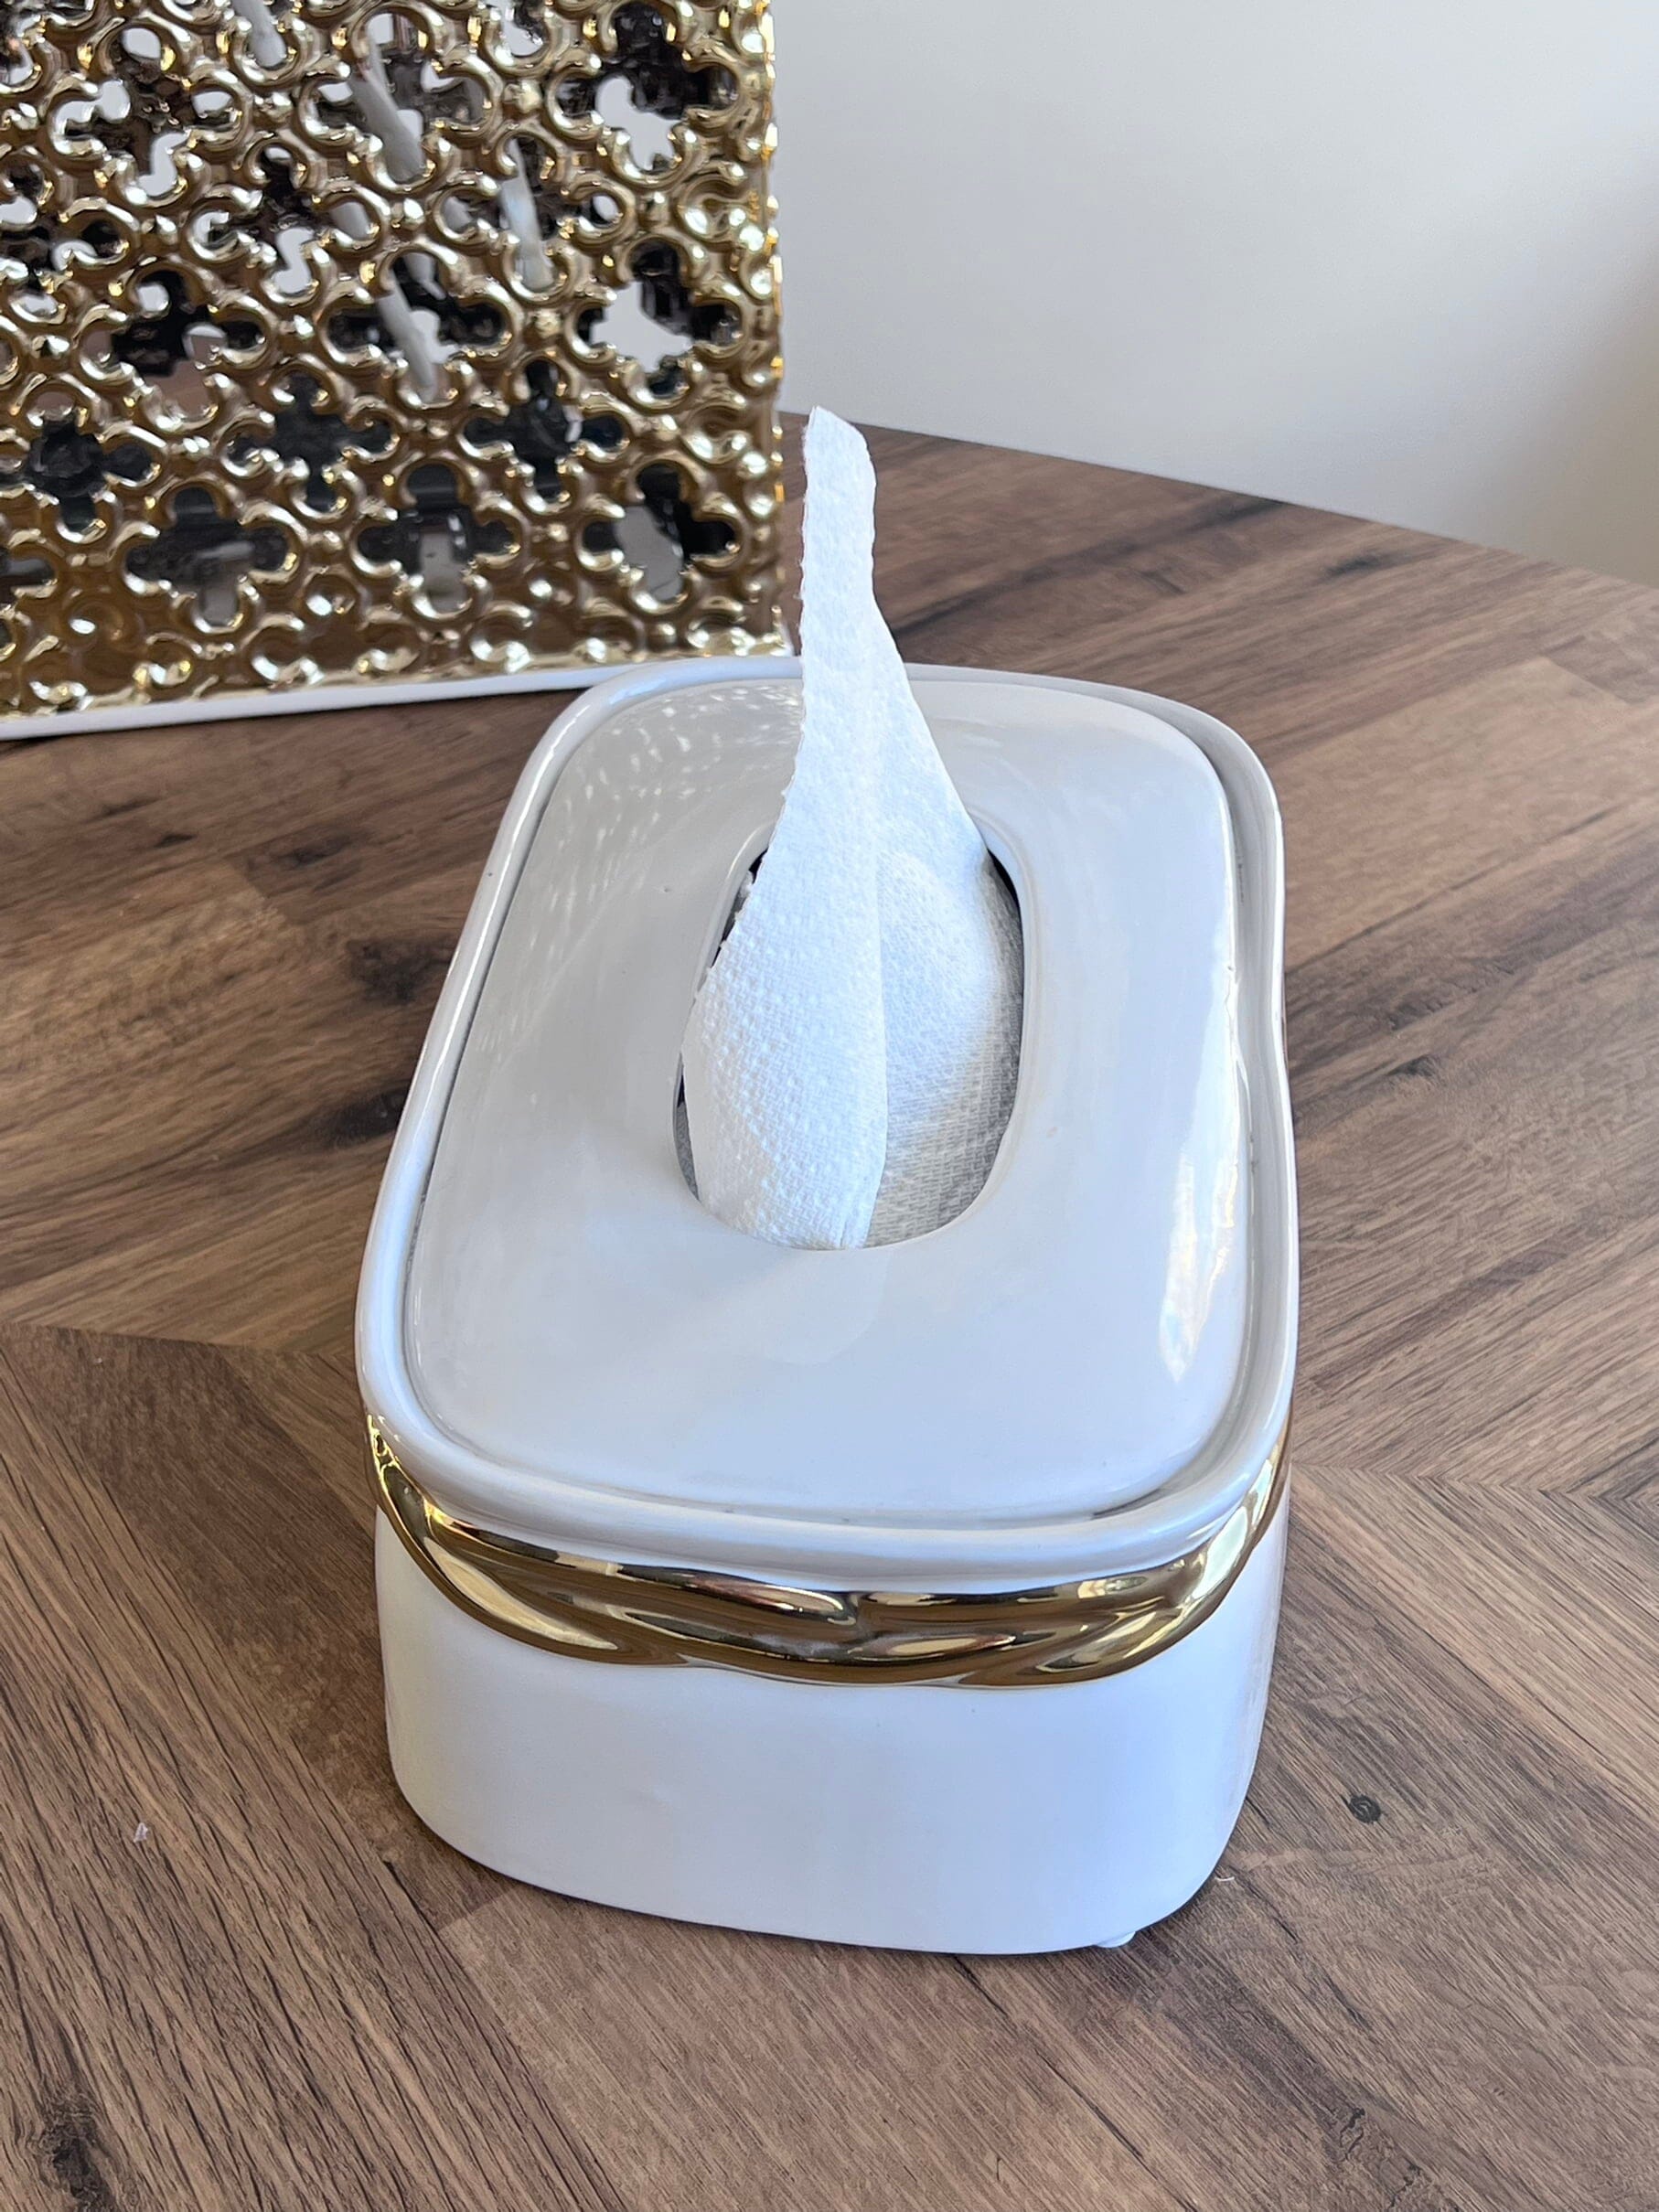 White Tissue Box Gold Rounded Design Facial Tissue Holders High Class Touch - Home Decor 